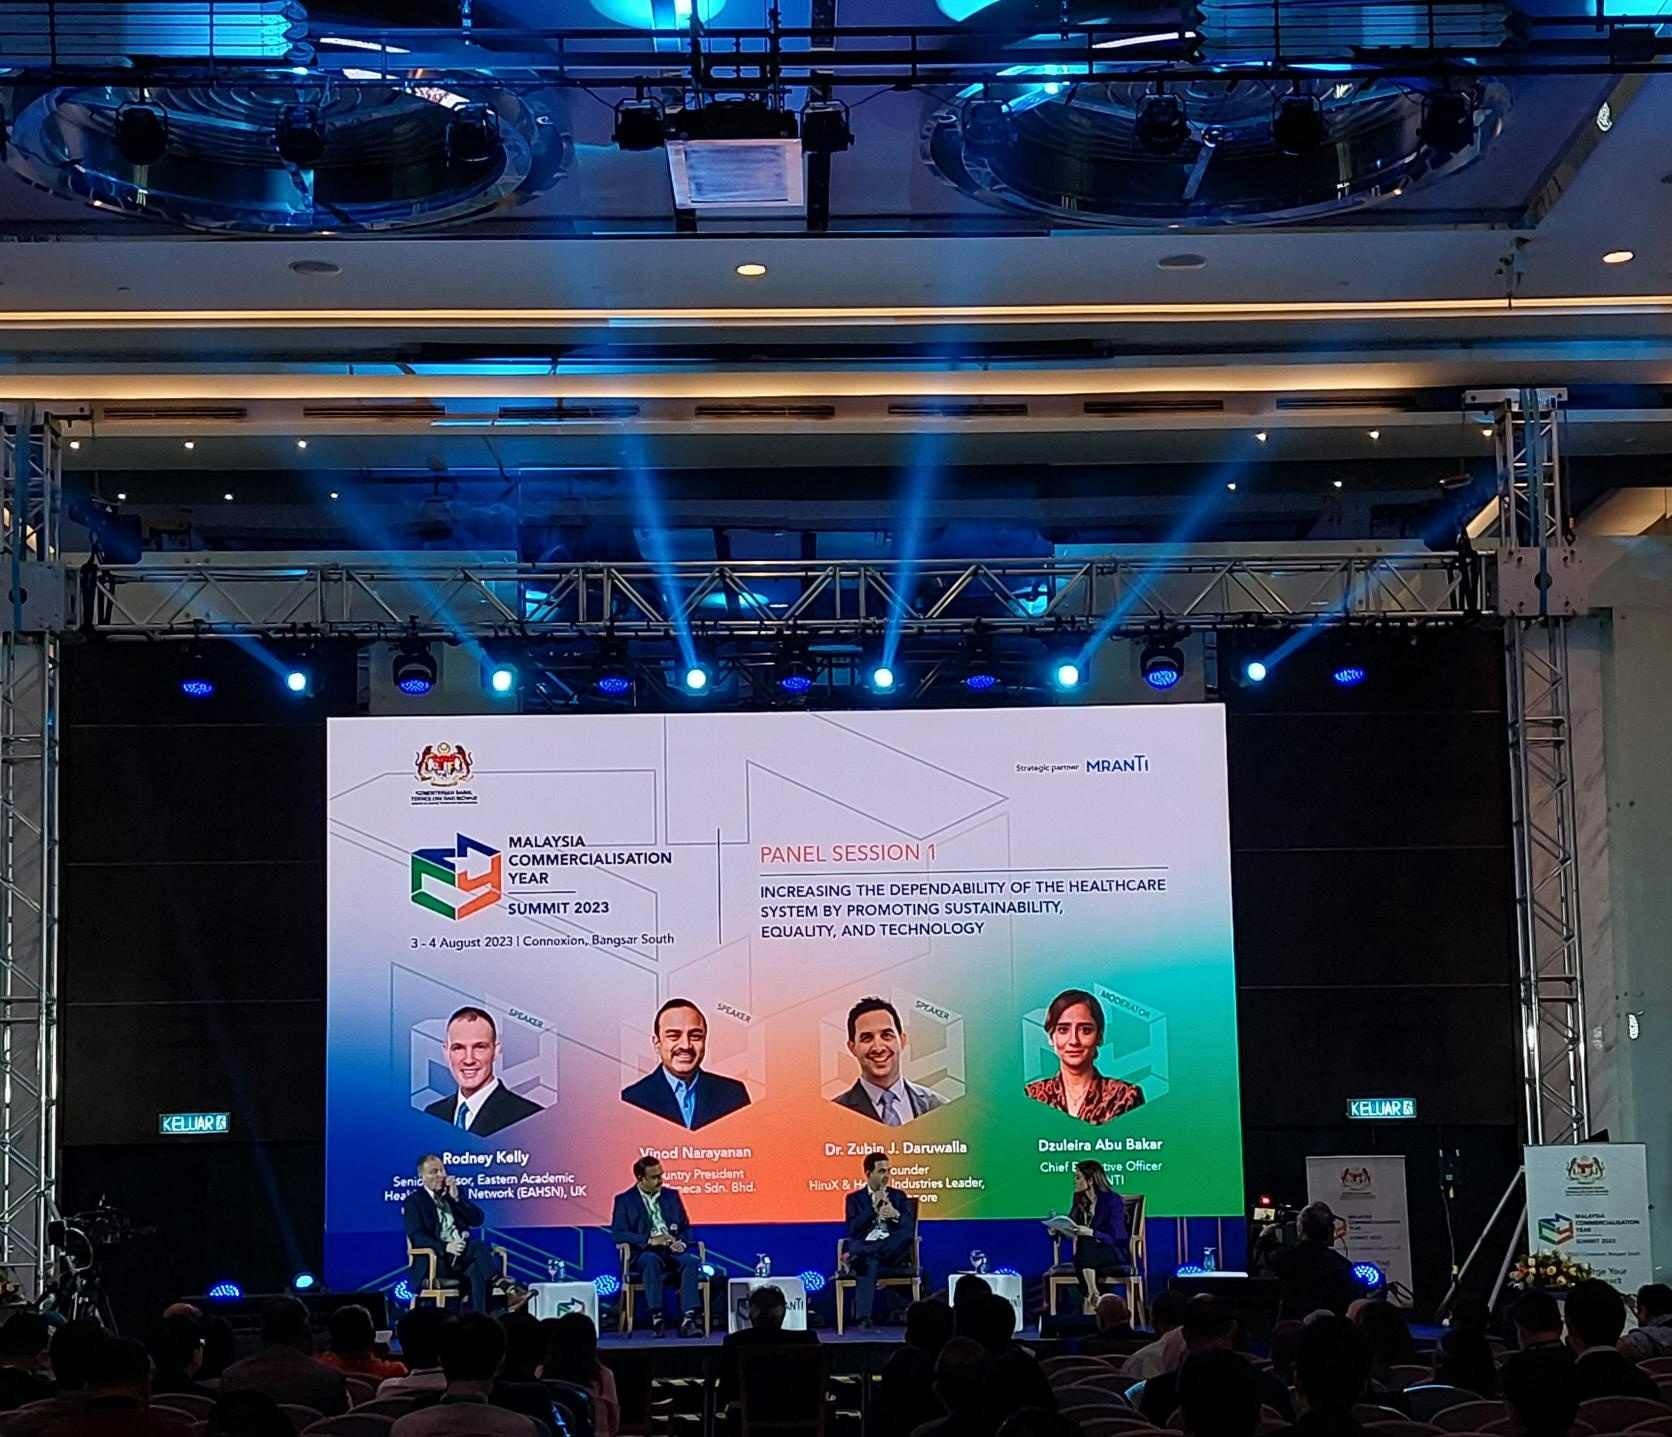 The Malaysia Commercialization Year (MCY) Summit 2023